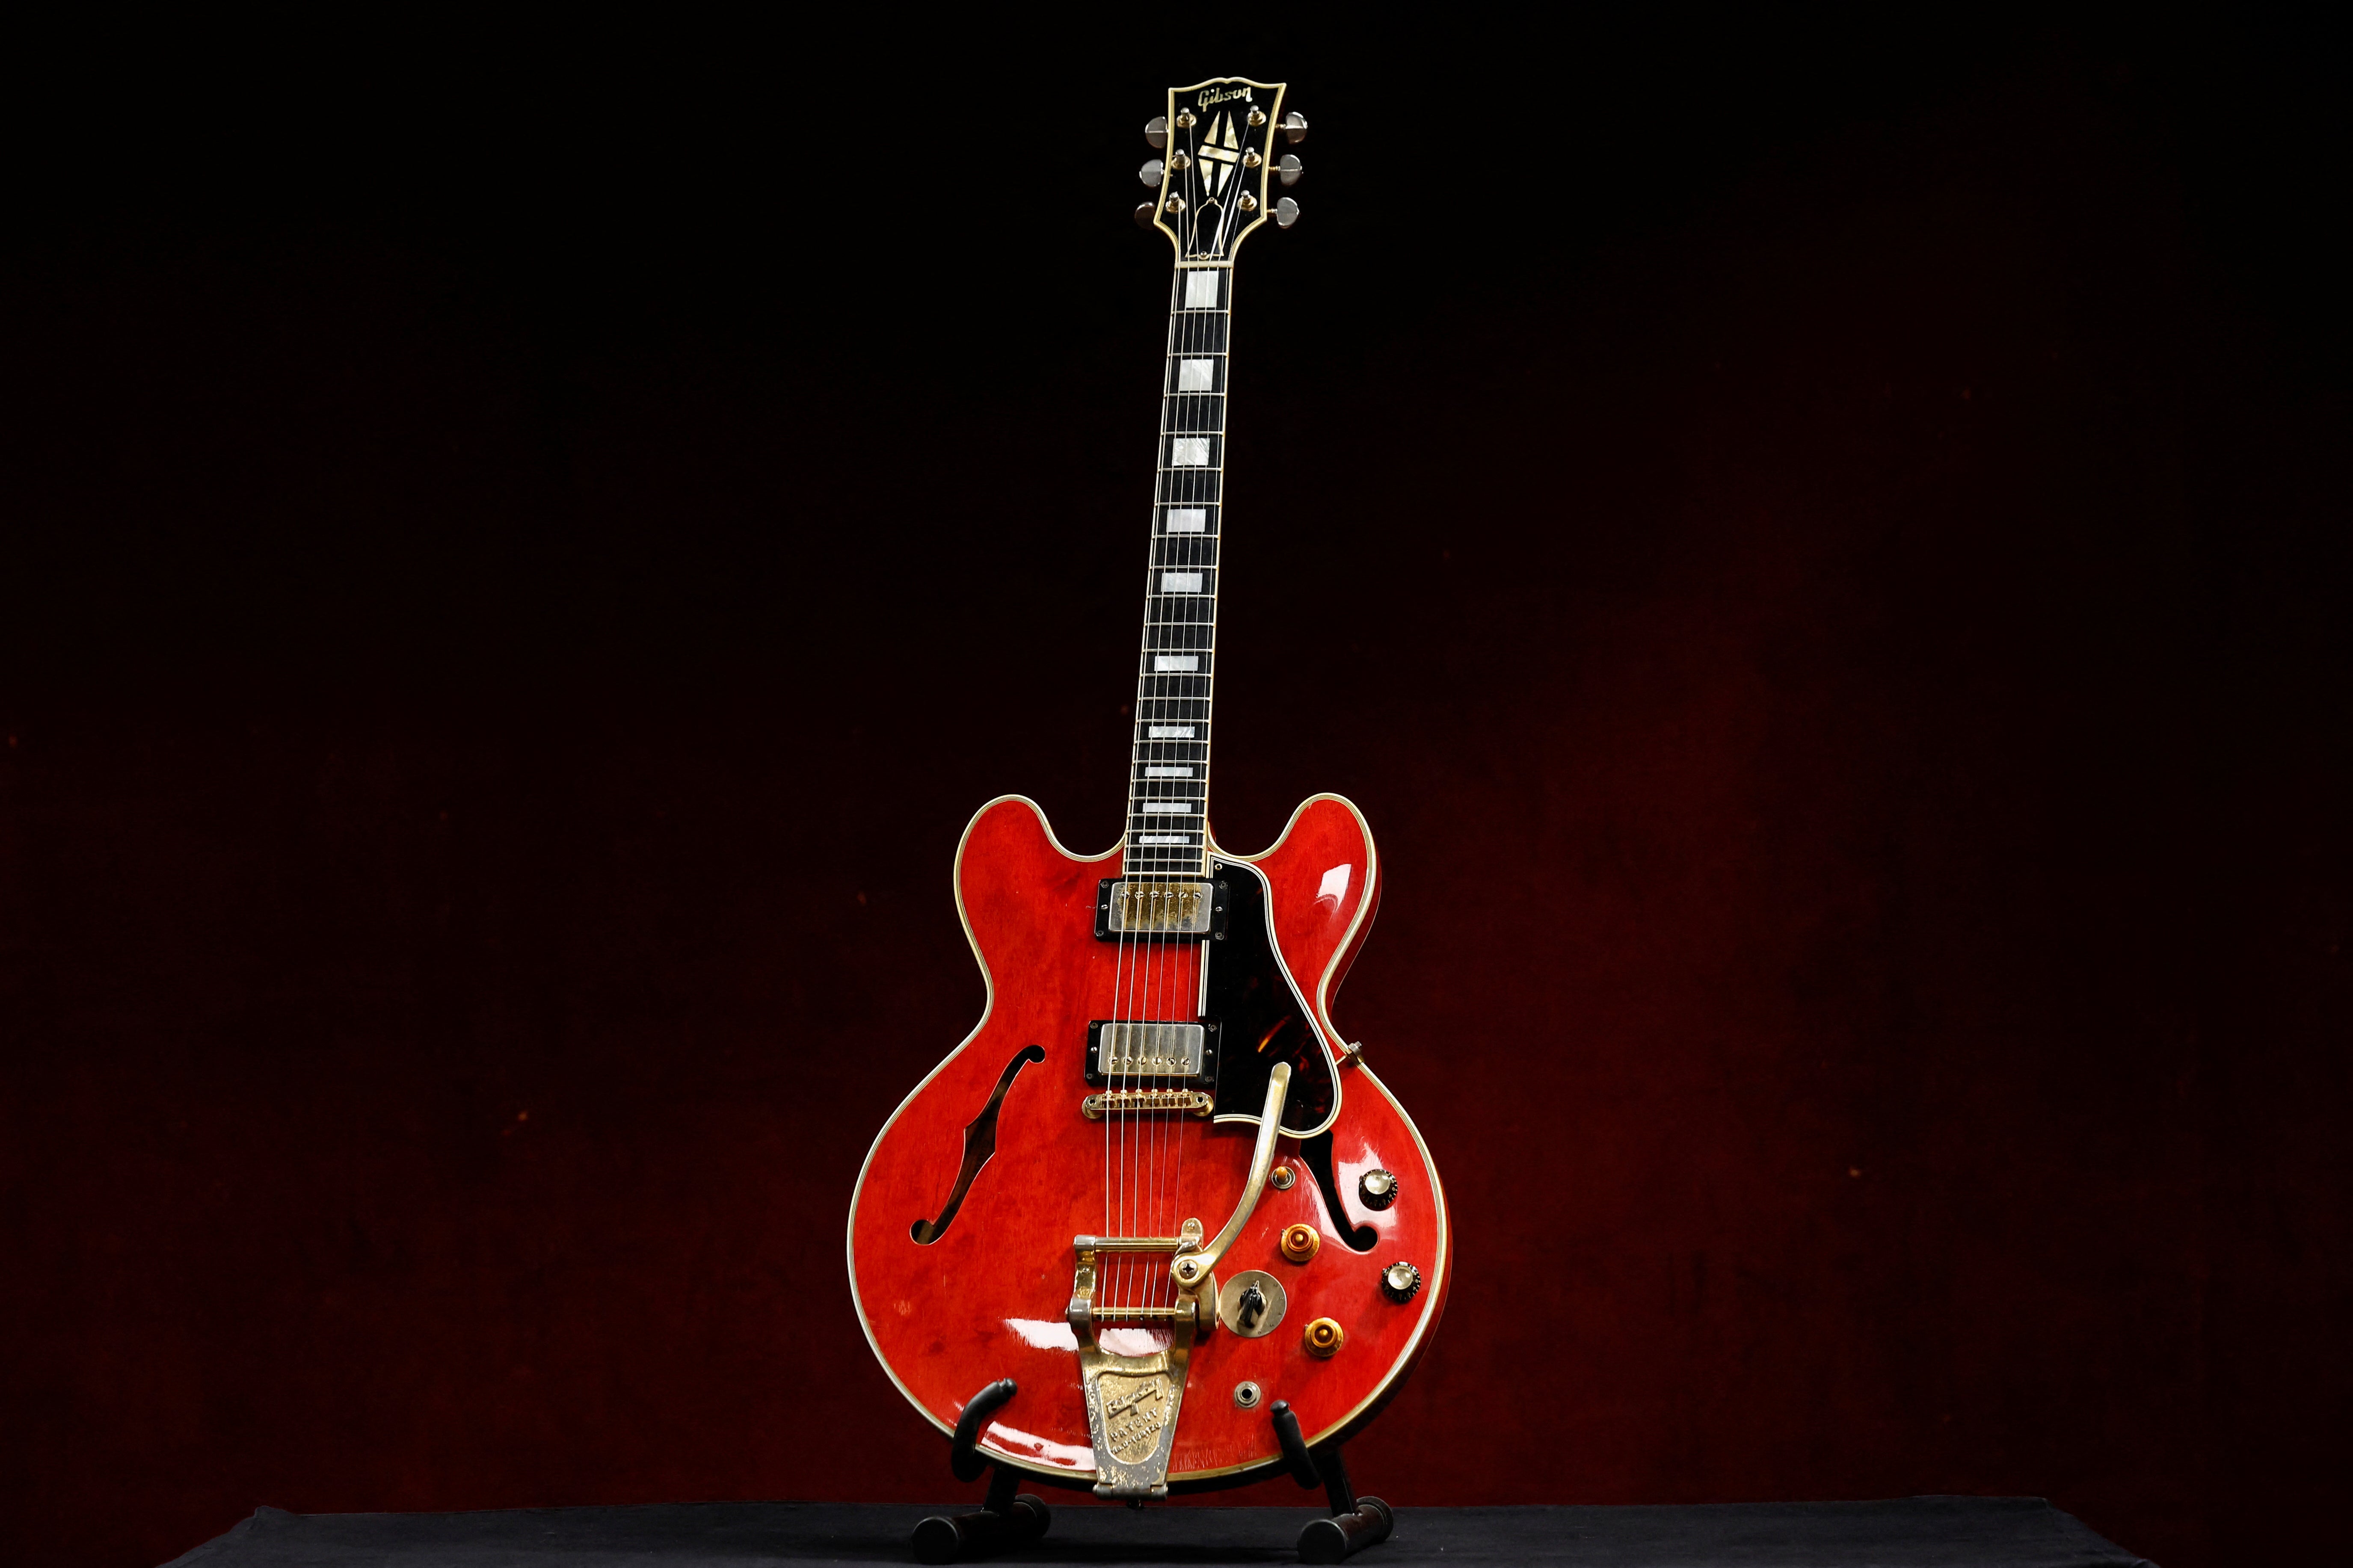 The red Gibson ES-355